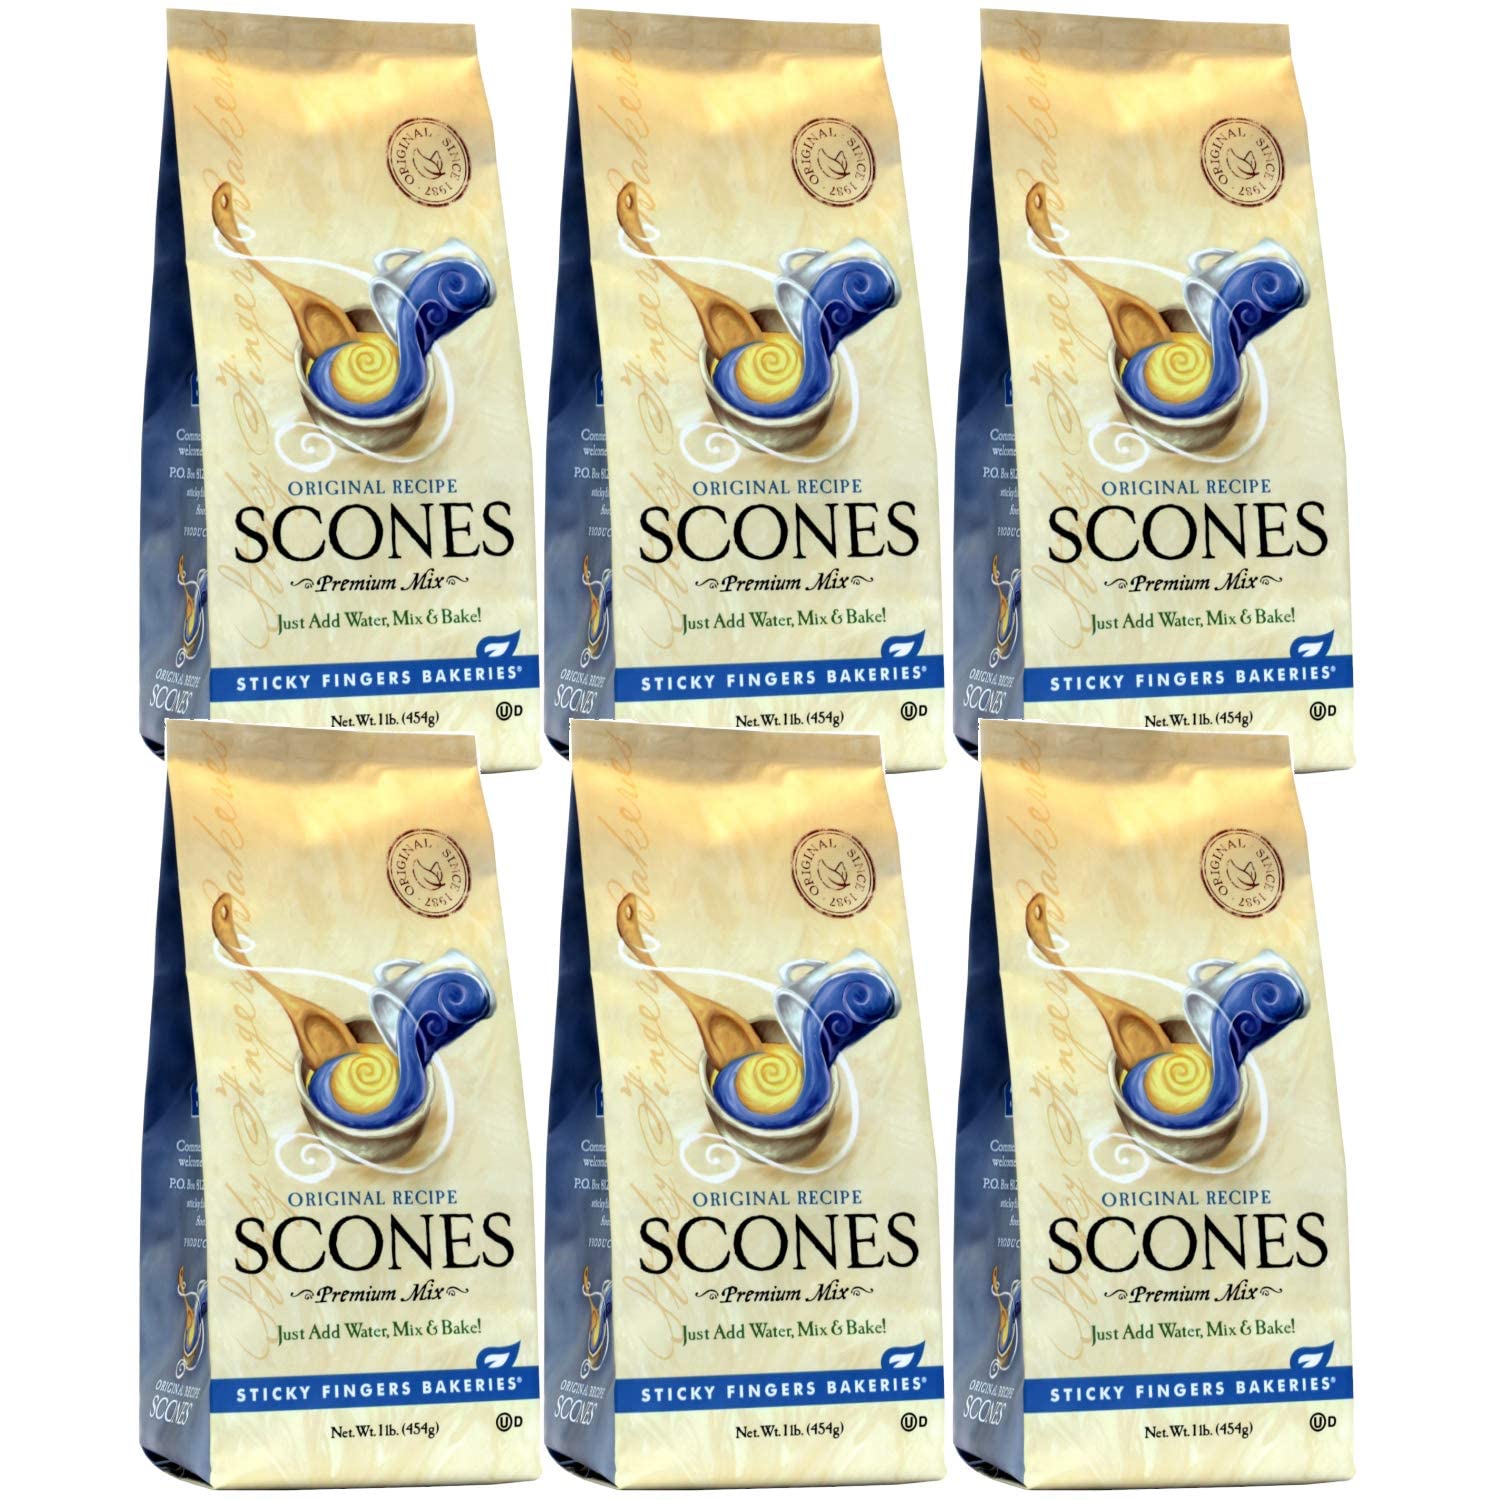 English Scone Mix, Original Flavor by Sticky Fingers Bakeries – Easy to Make English Scones Fresh Baked, Makes 12 Scones (6pk)